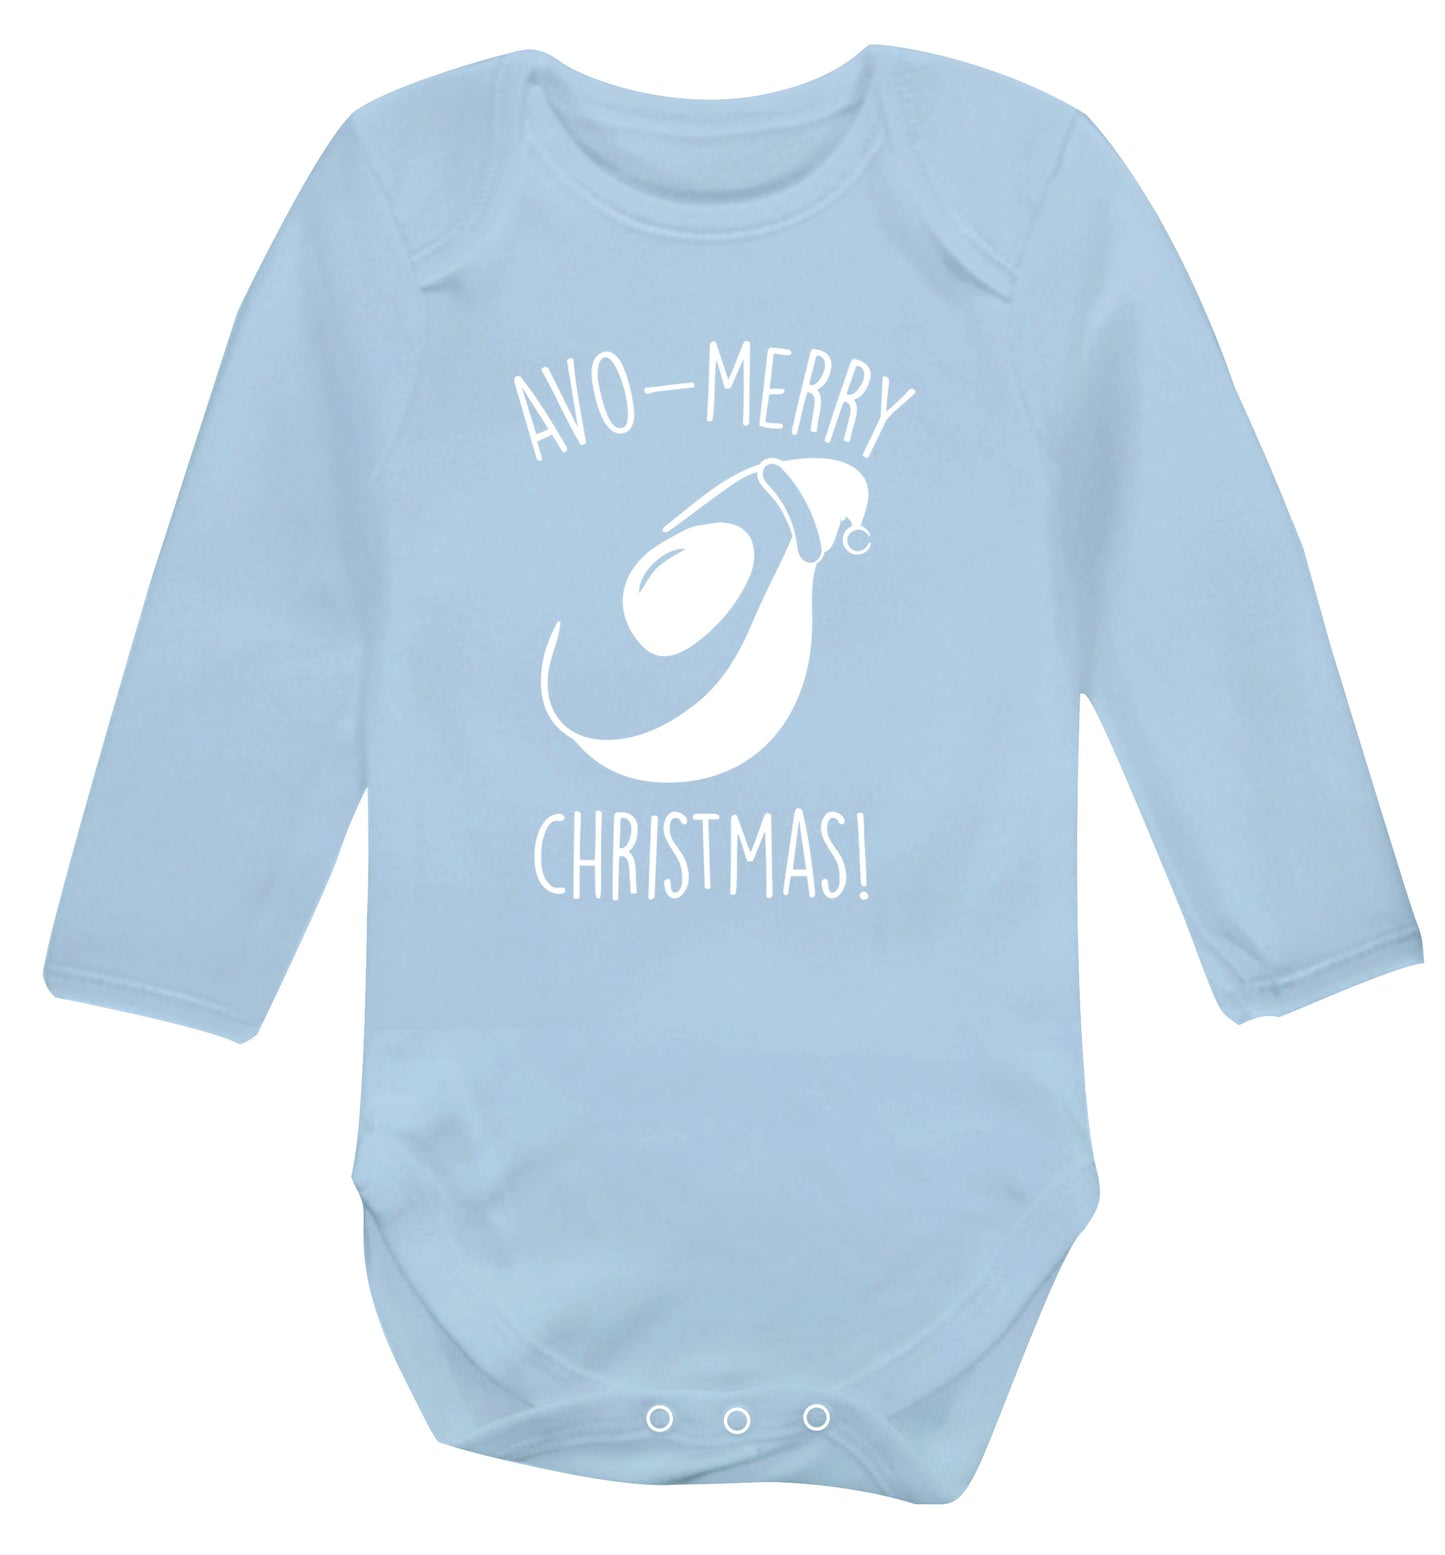 Avo-Merry Christmas Baby Vest long sleeved pale blue 6-12 months